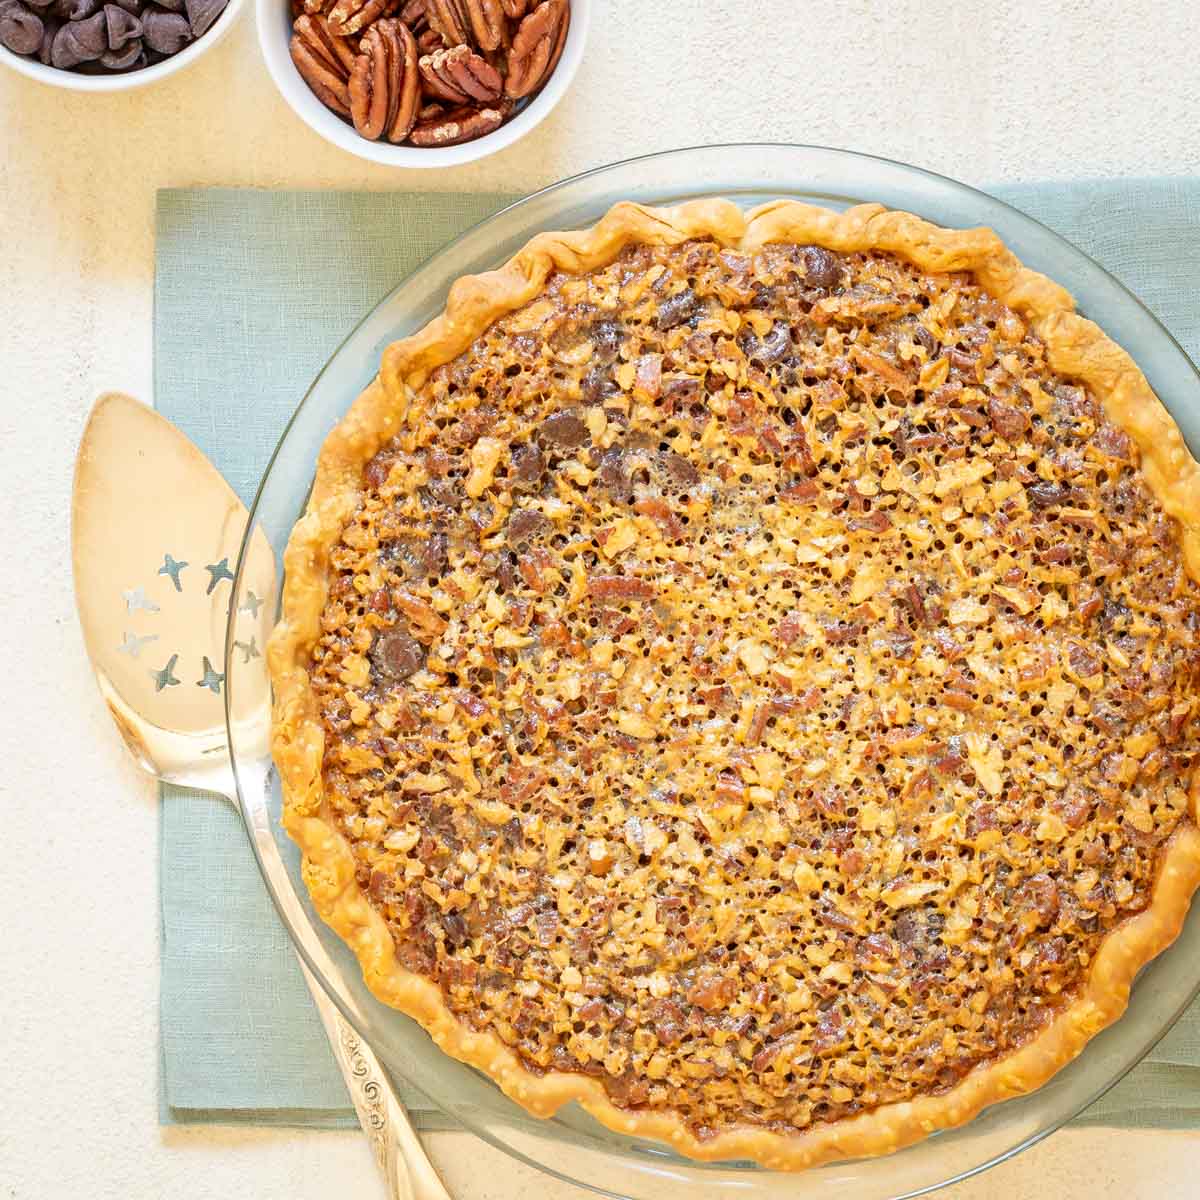 Overhead shot of Chocolate Pecan Pie, with a server and 2 bowls of pecans and chocolate chips on the side